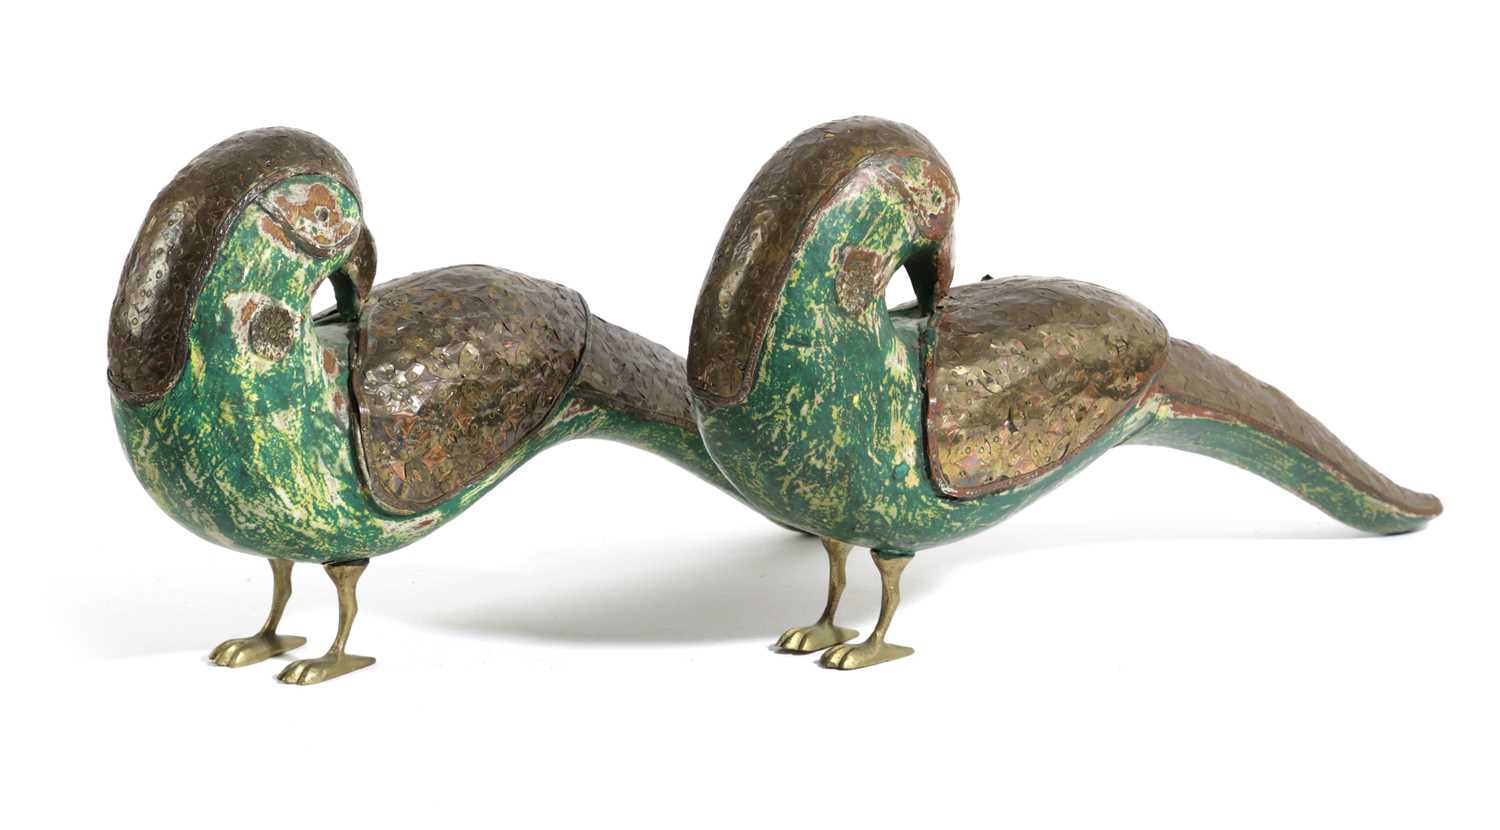 A PAIR OF INDIAN PAINTED WOOD AND METAL MOUNTED BIRDS LATE 19TH / EARLY 20TH CENTURY modelled